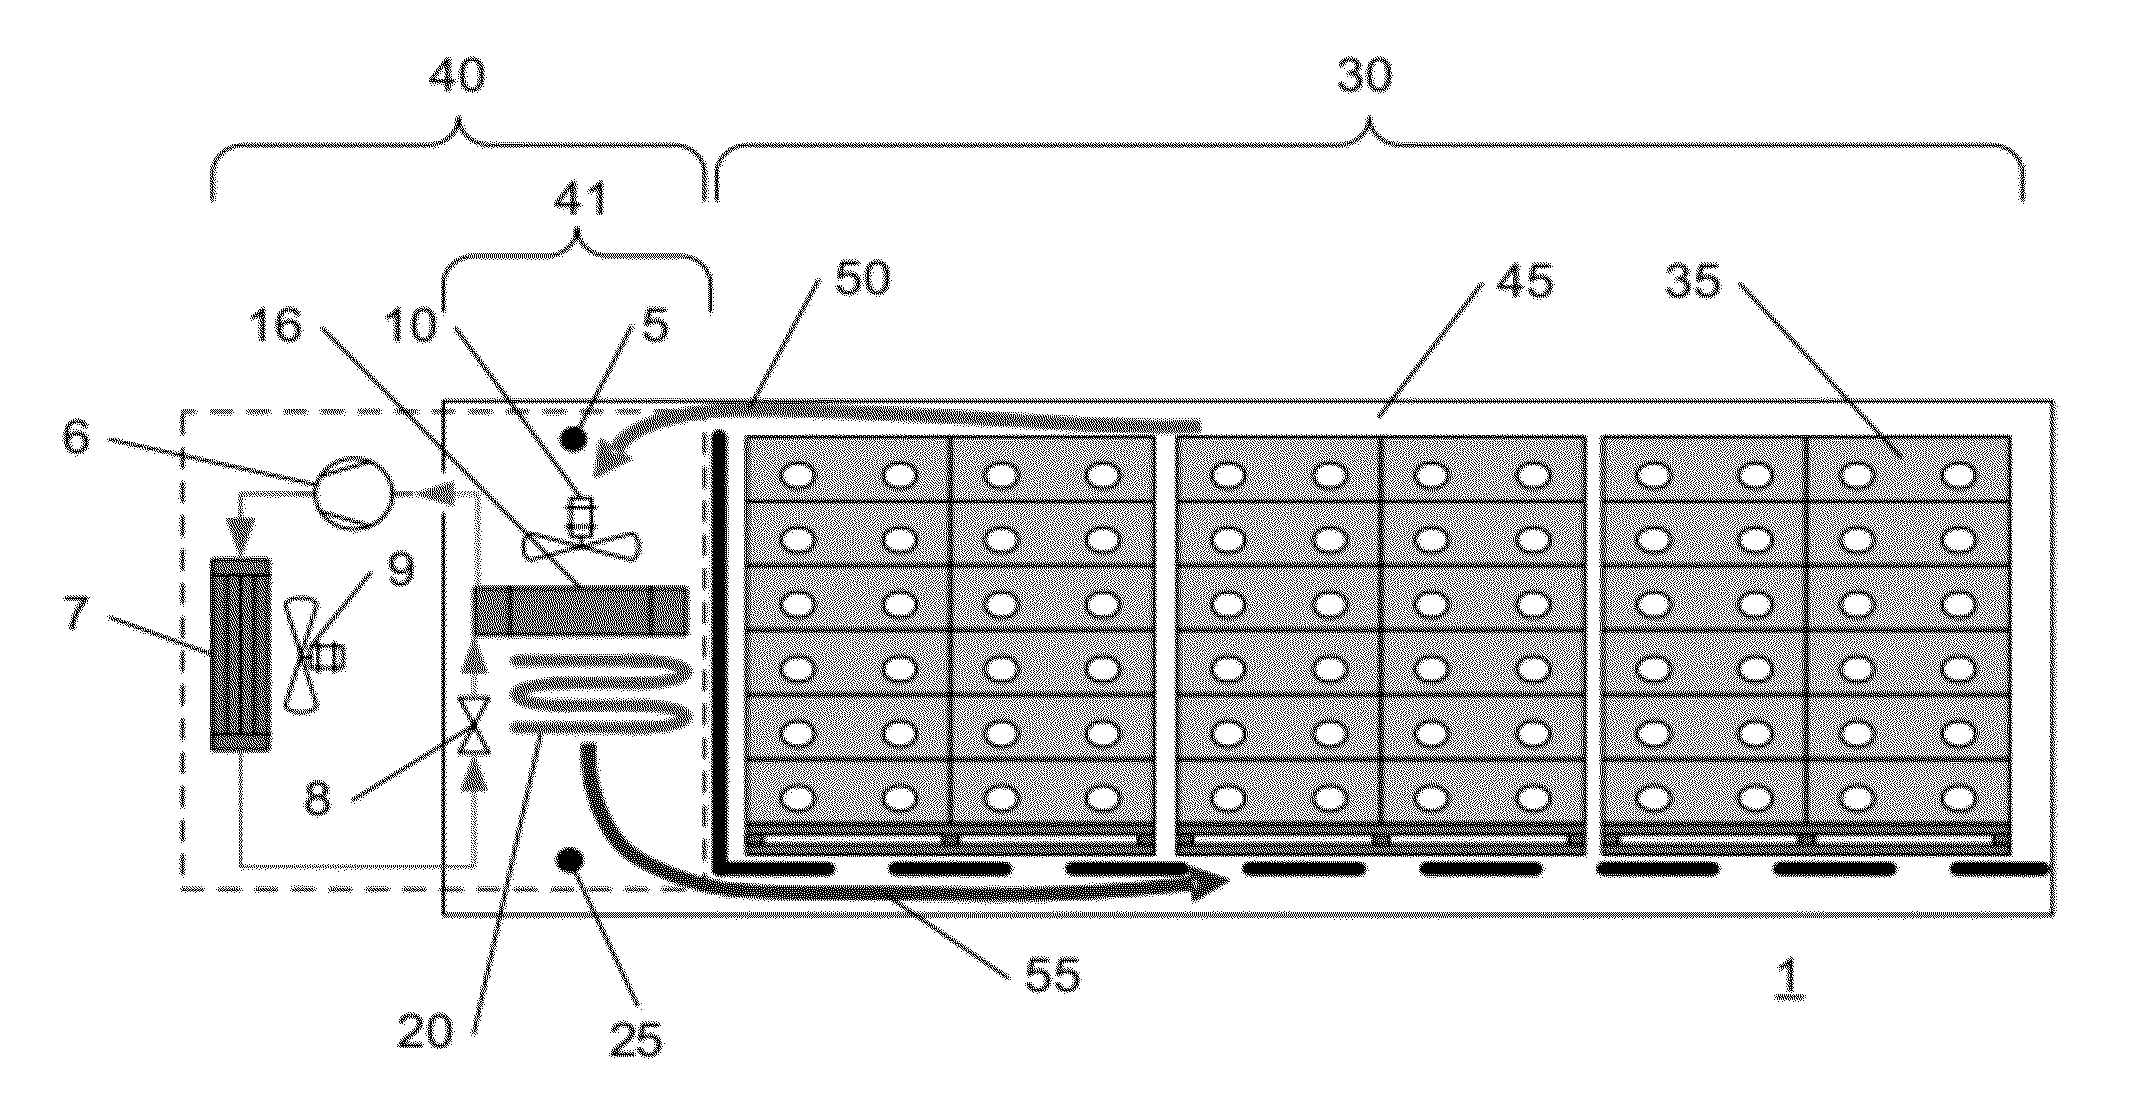 Internal air circulation control in a refrigerated transport container